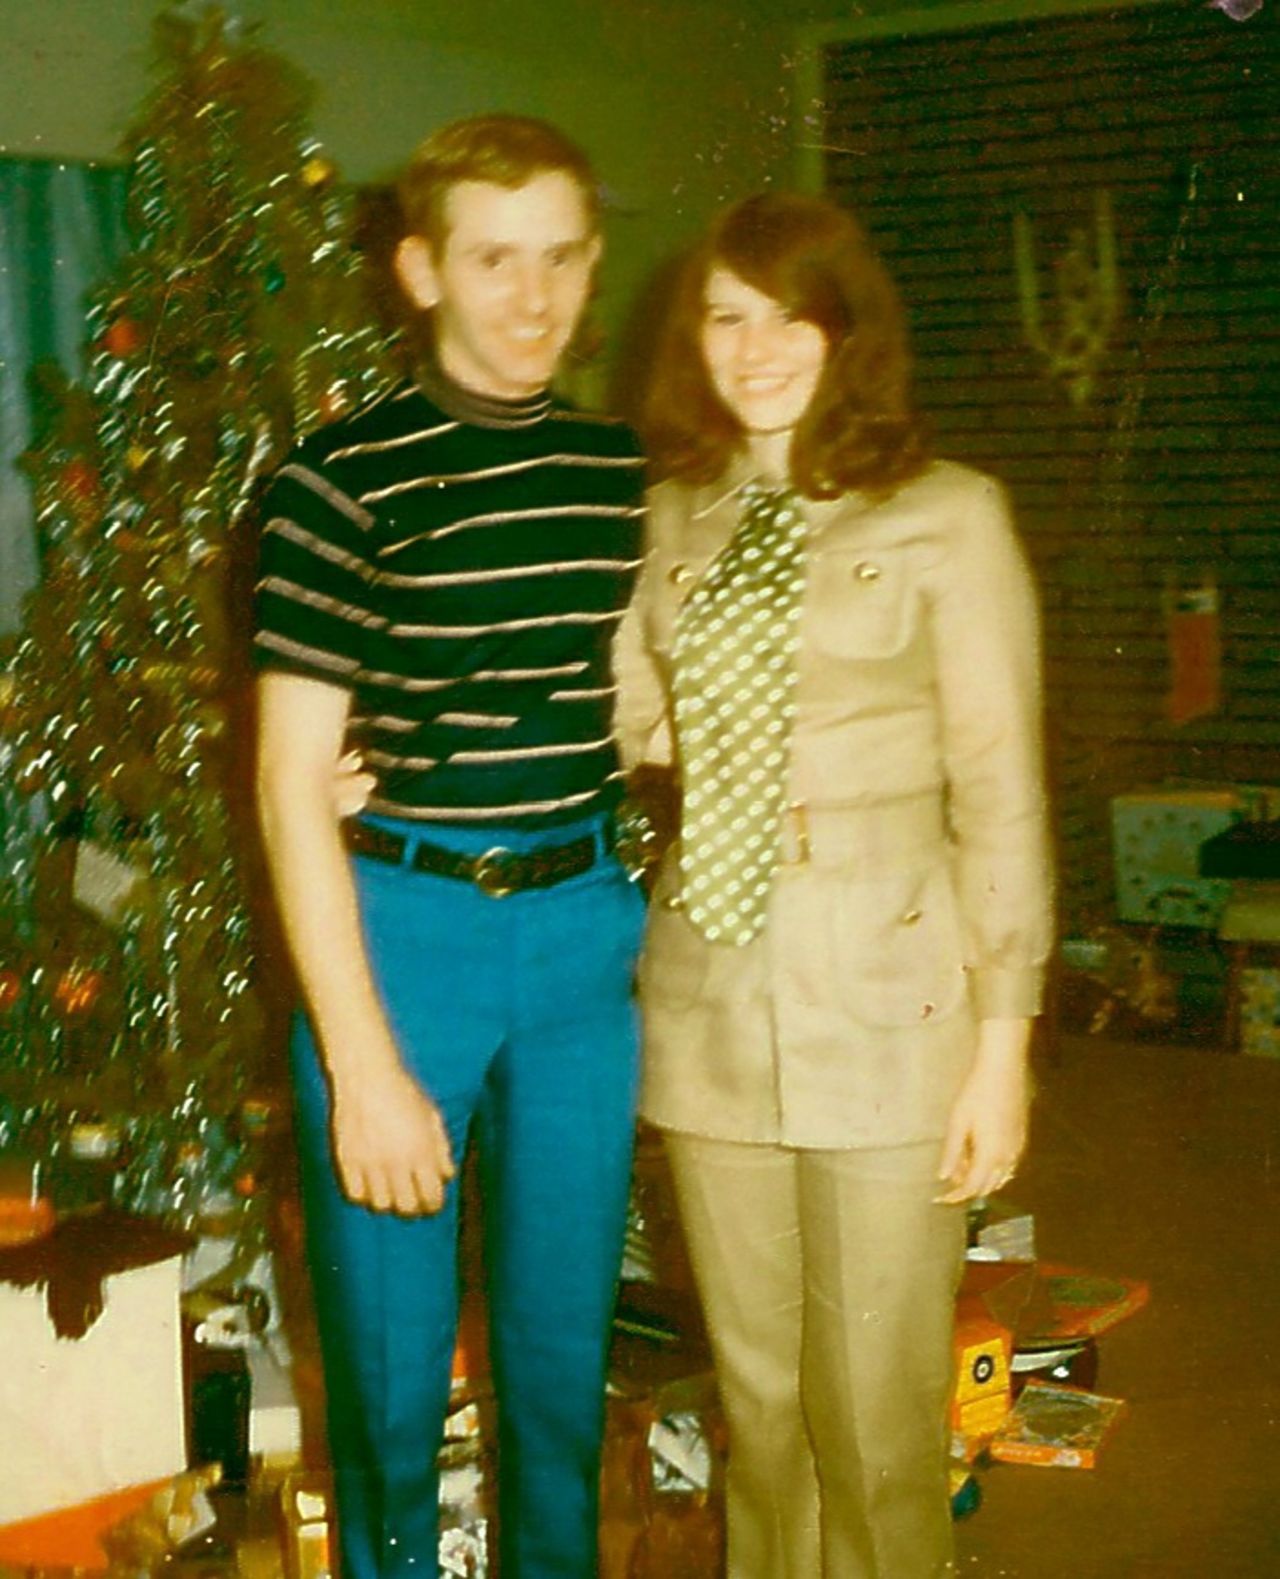 The Hughesville, Maryland, resident posed with her high school sweetheart and future husband at Christmas in 1969. "I loved the British Mod look and models like Pattie Boyd and actress Jane Asher."